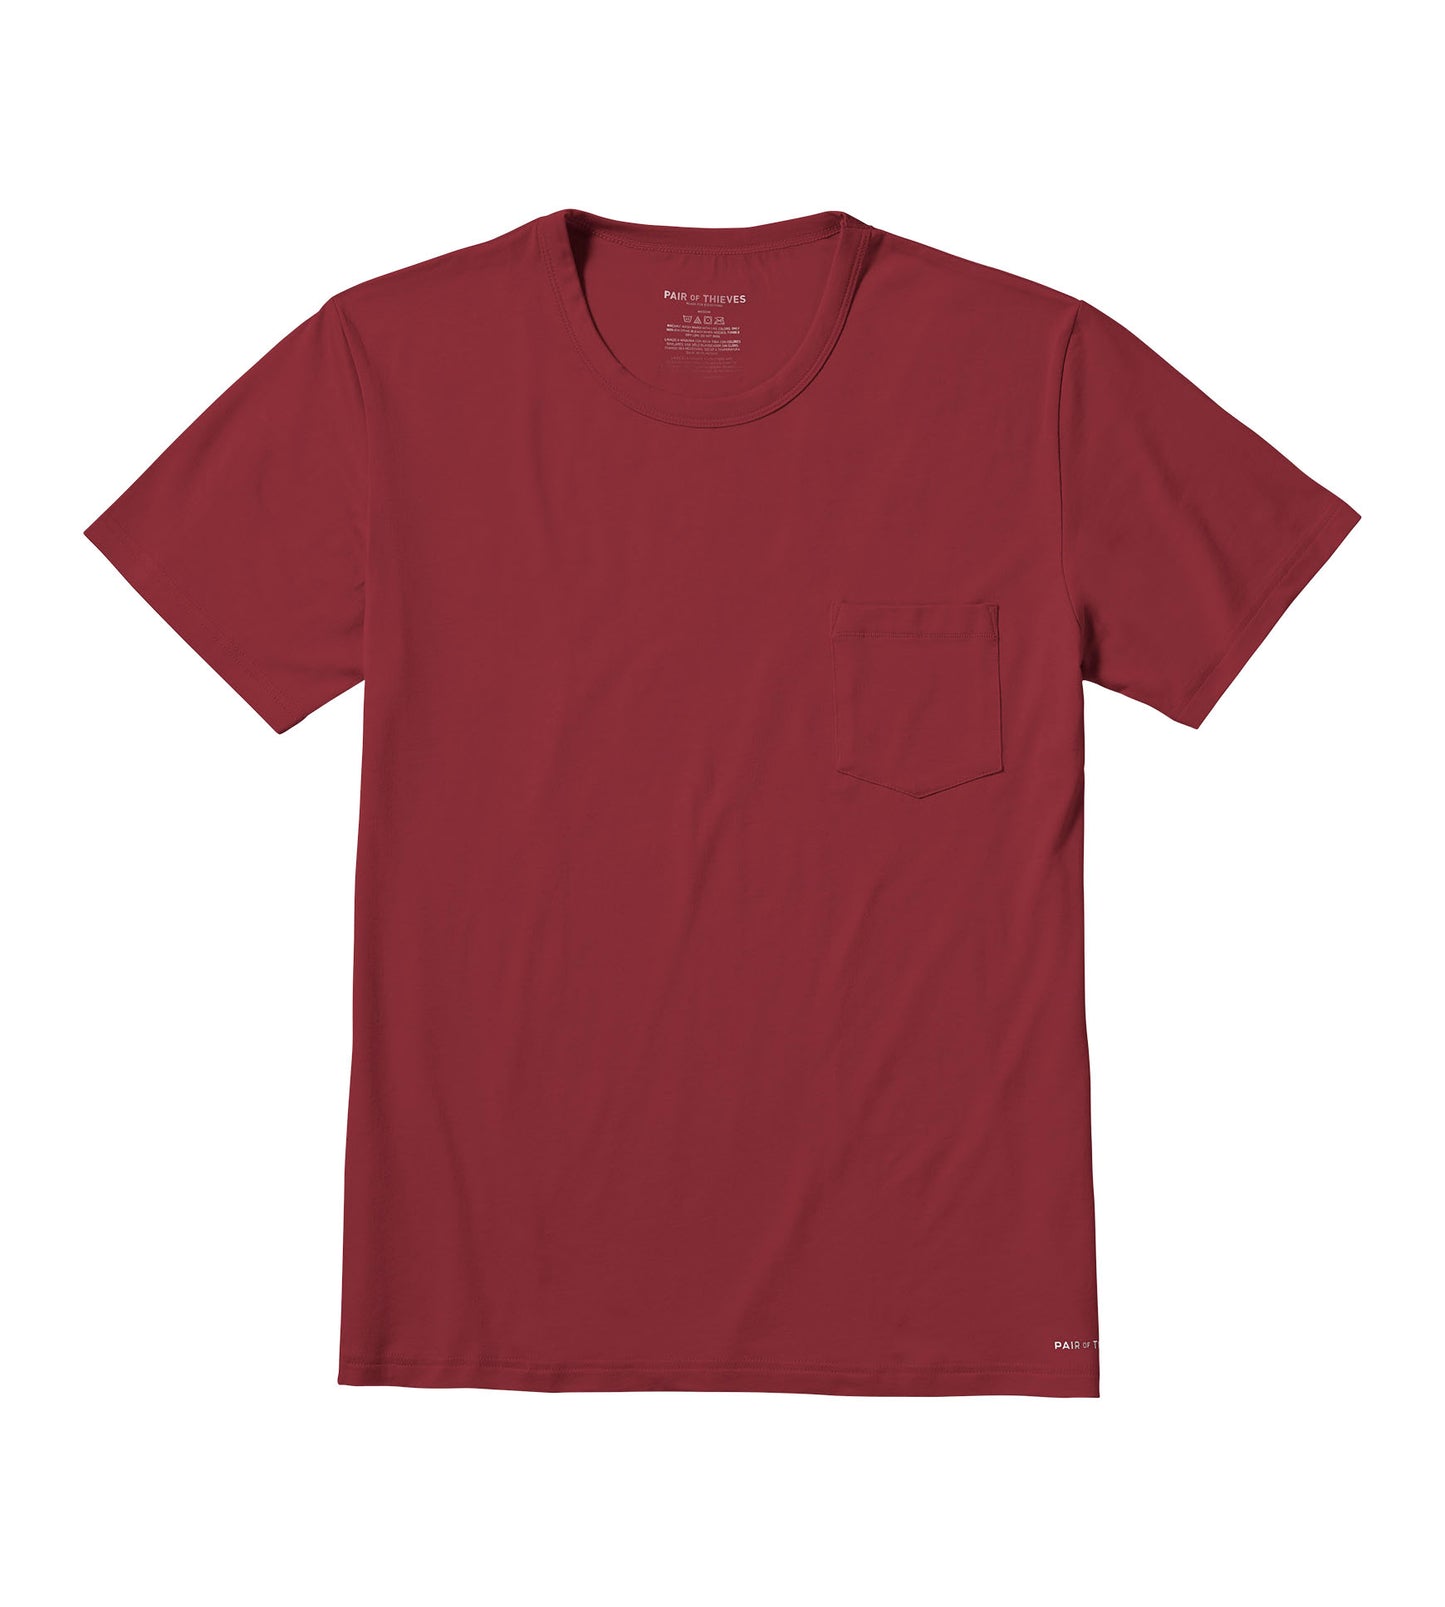 SuperSoft Crew Neck Pocket Tee colors contain: Brown, Maroon, Pink, Brown, Rosy brown, Maroon, Brown, Brown, Dim gray